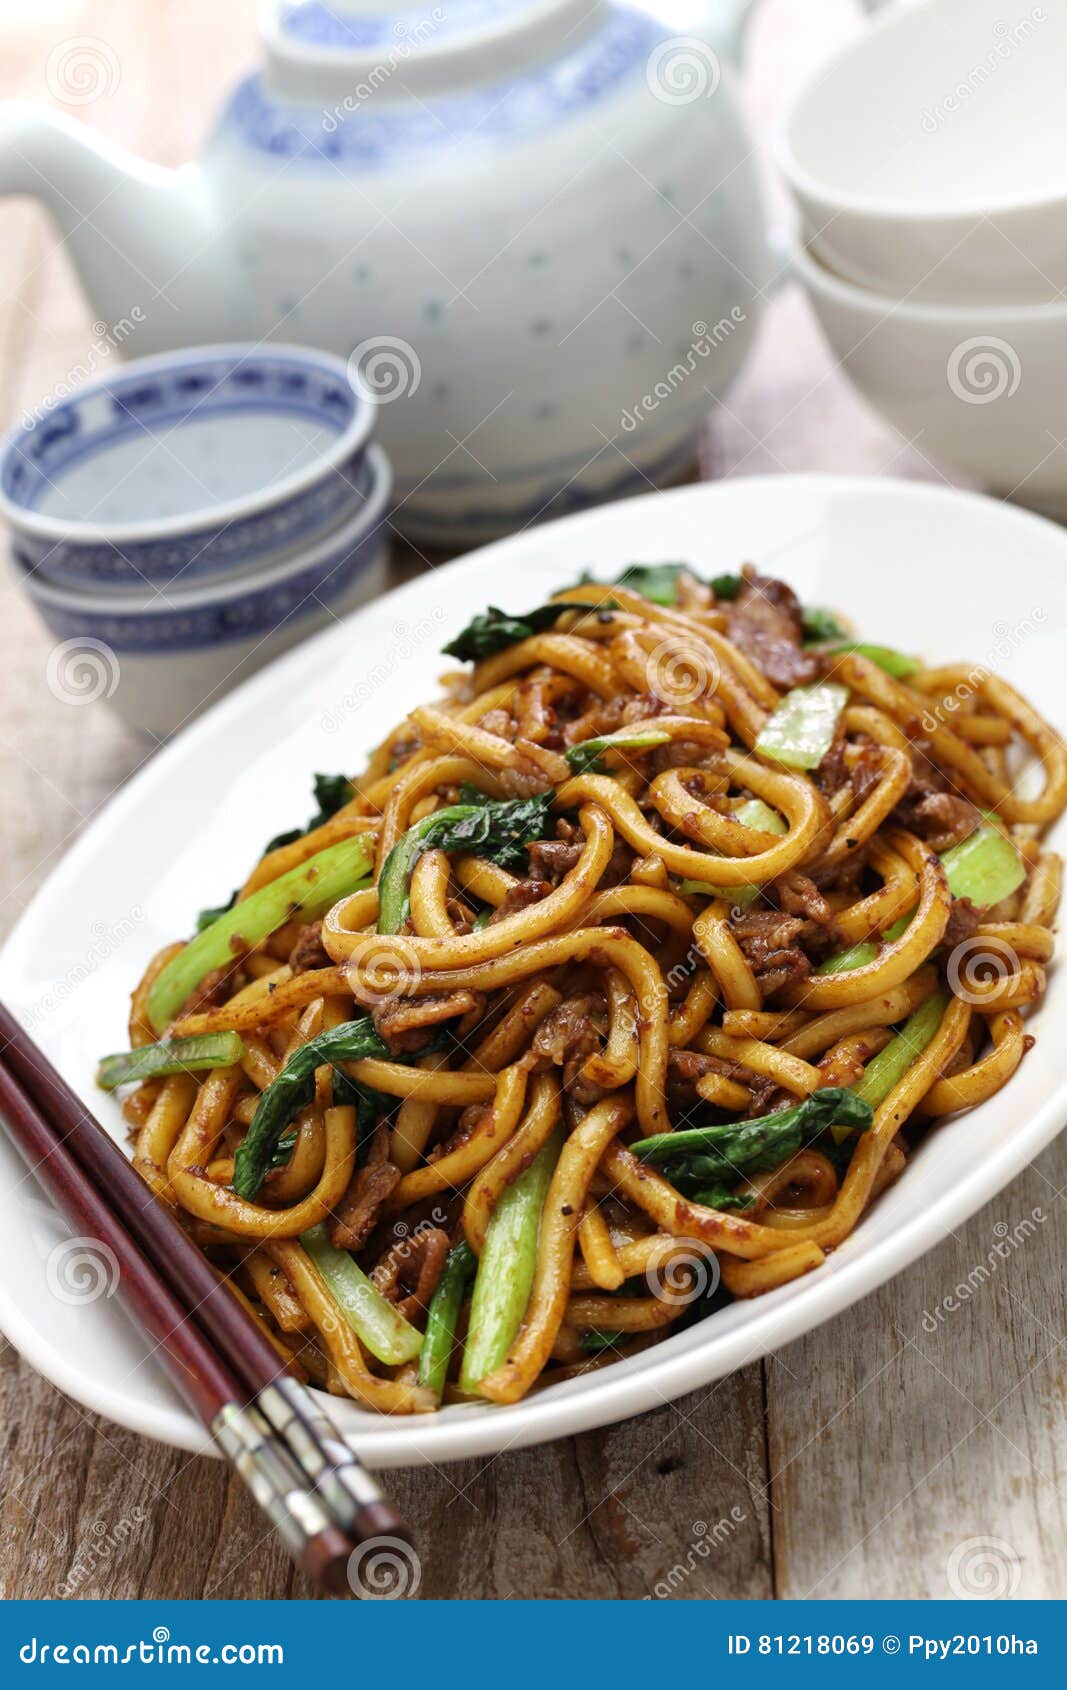 Shanghai Fried Noodle, Shanghai Chow Mein Stock Image - Image of ...